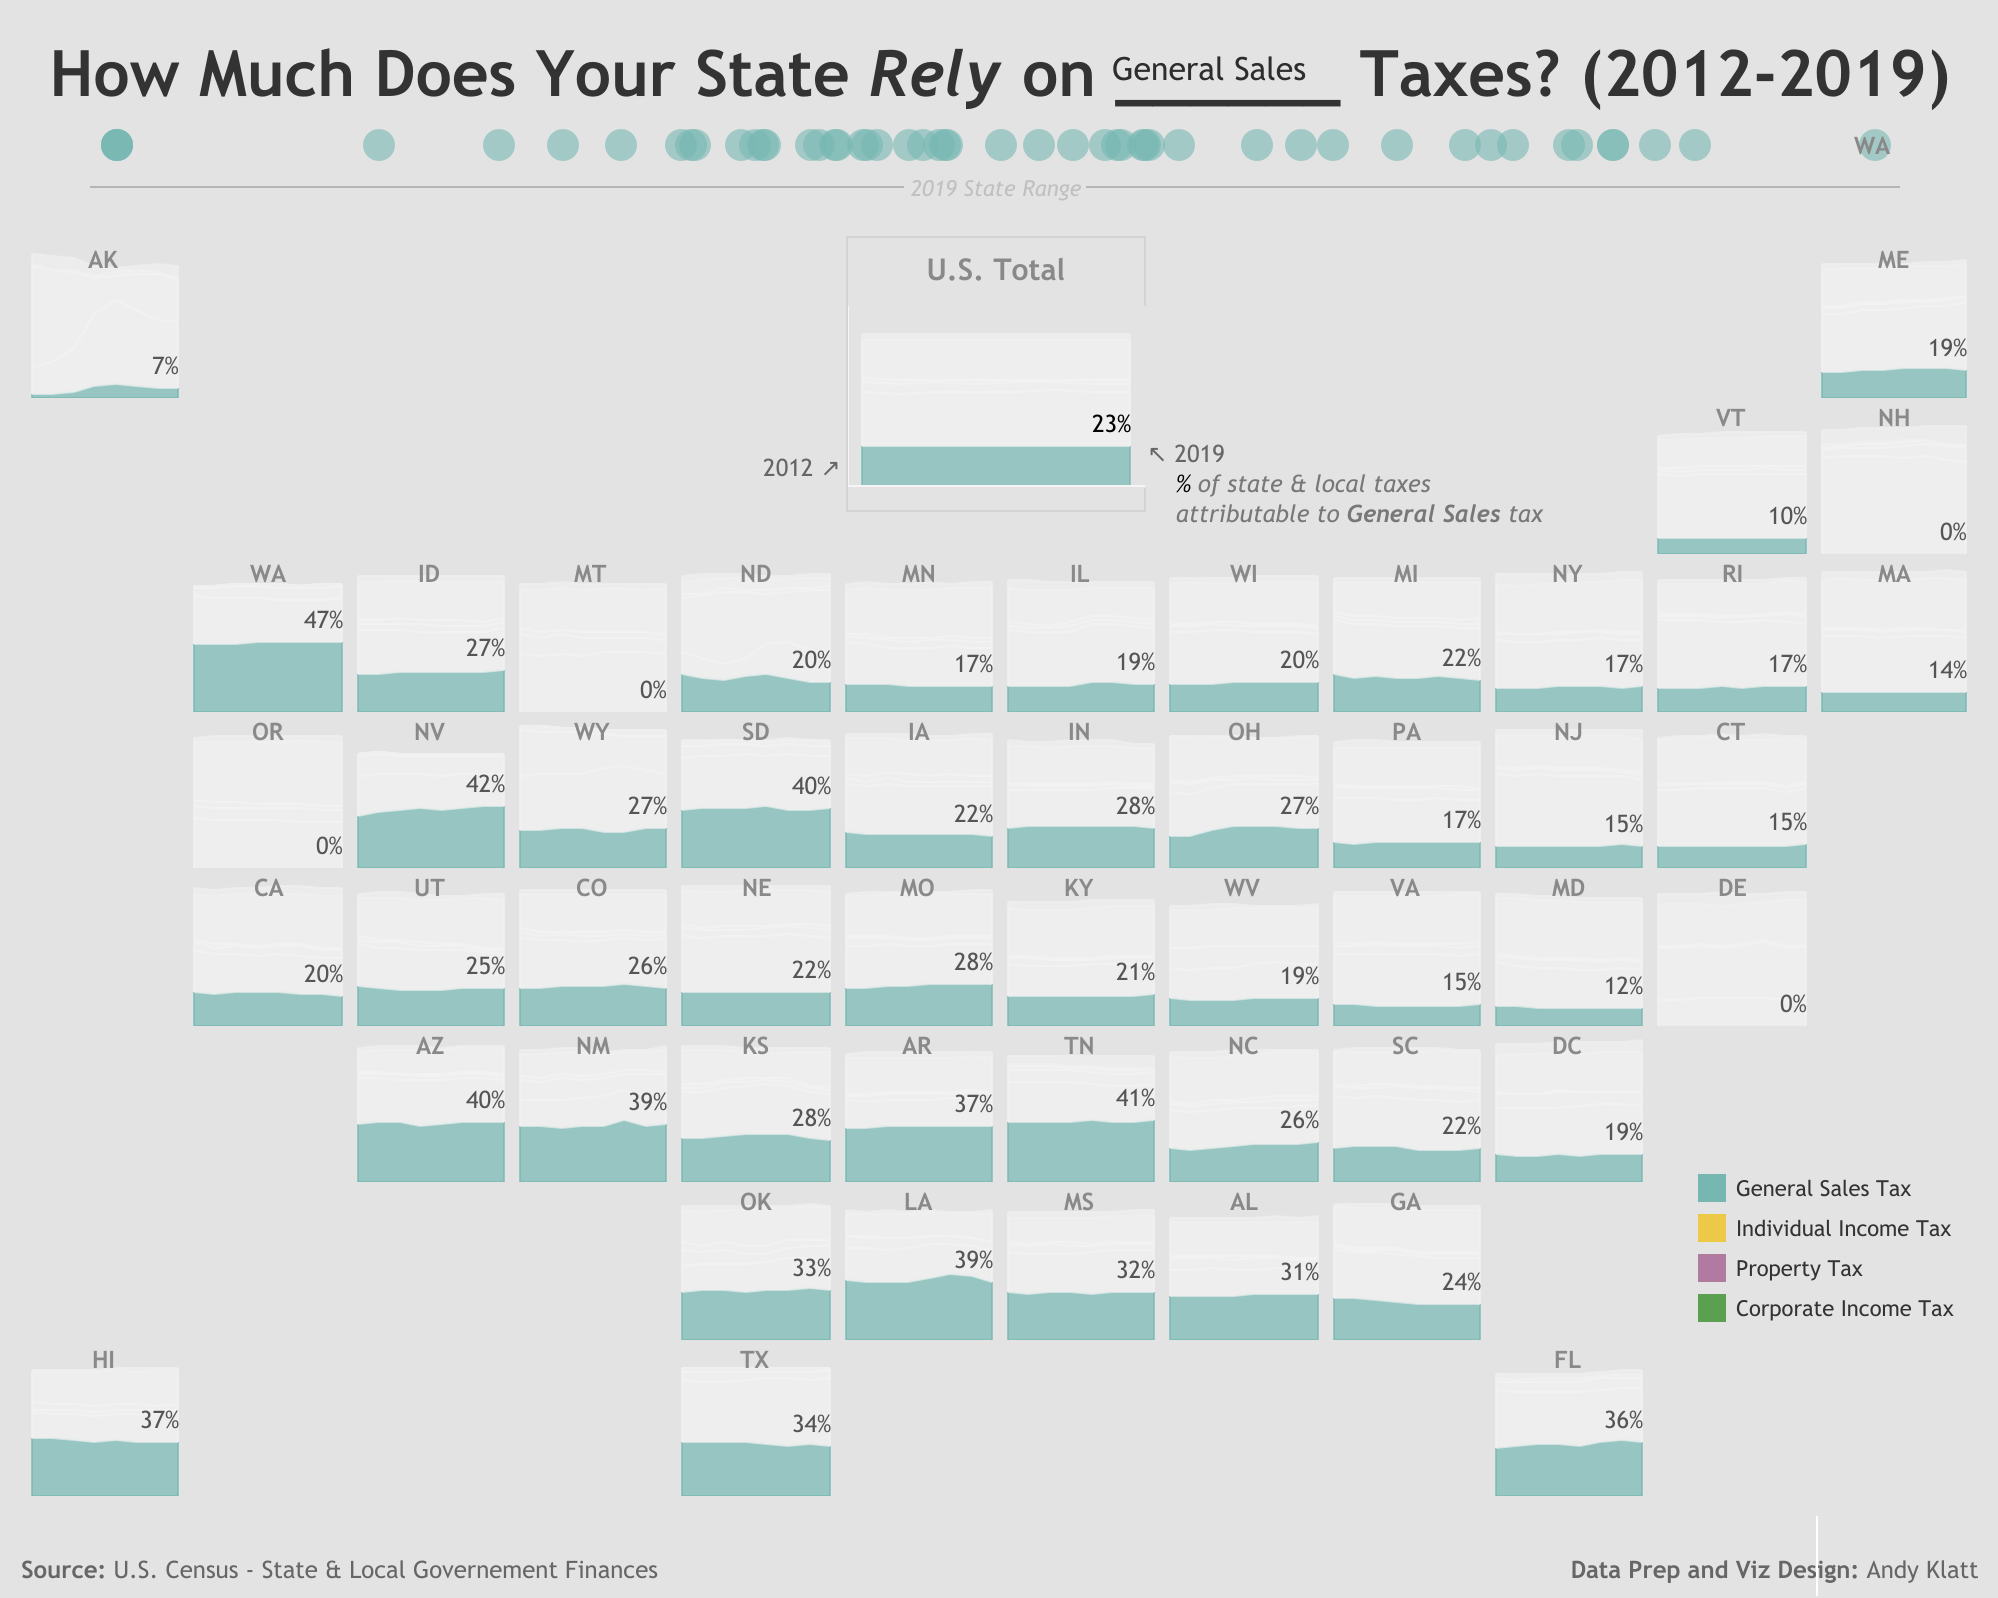 How Much Does Your State Rely on Property, Sales, & Income Taxes?